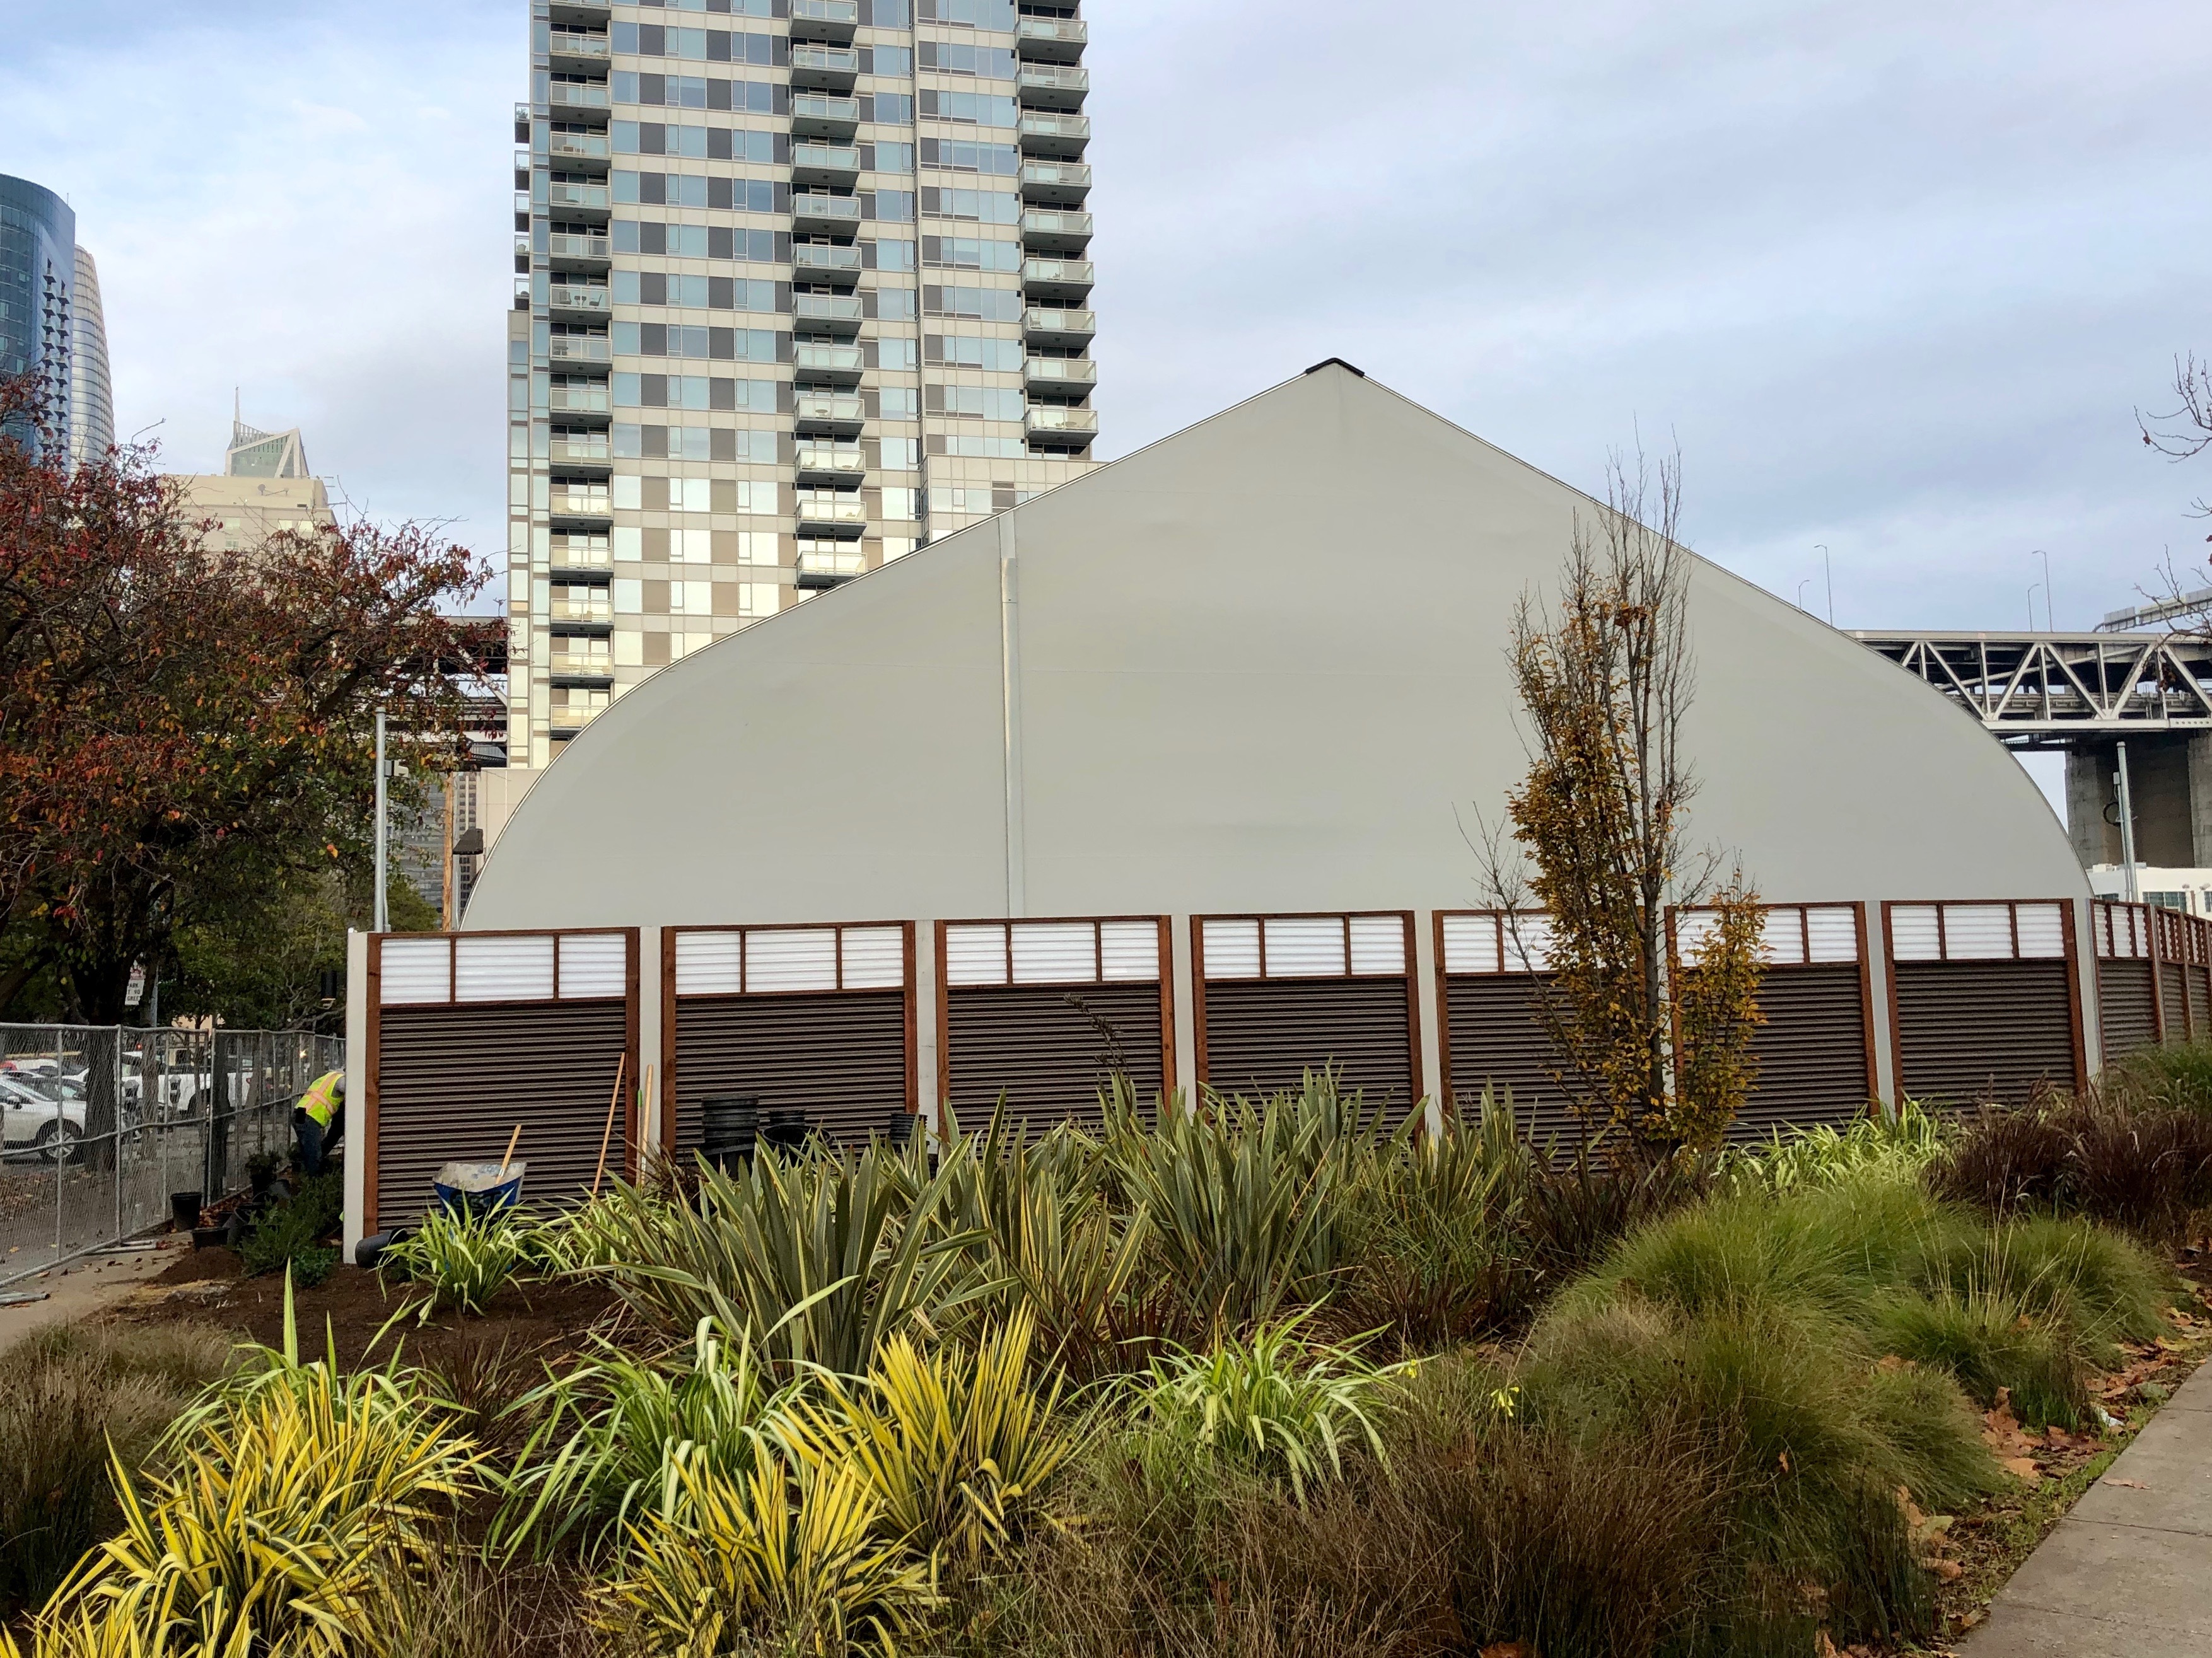 A tent-like white structure, with tall glass-covered high-rises in the background.